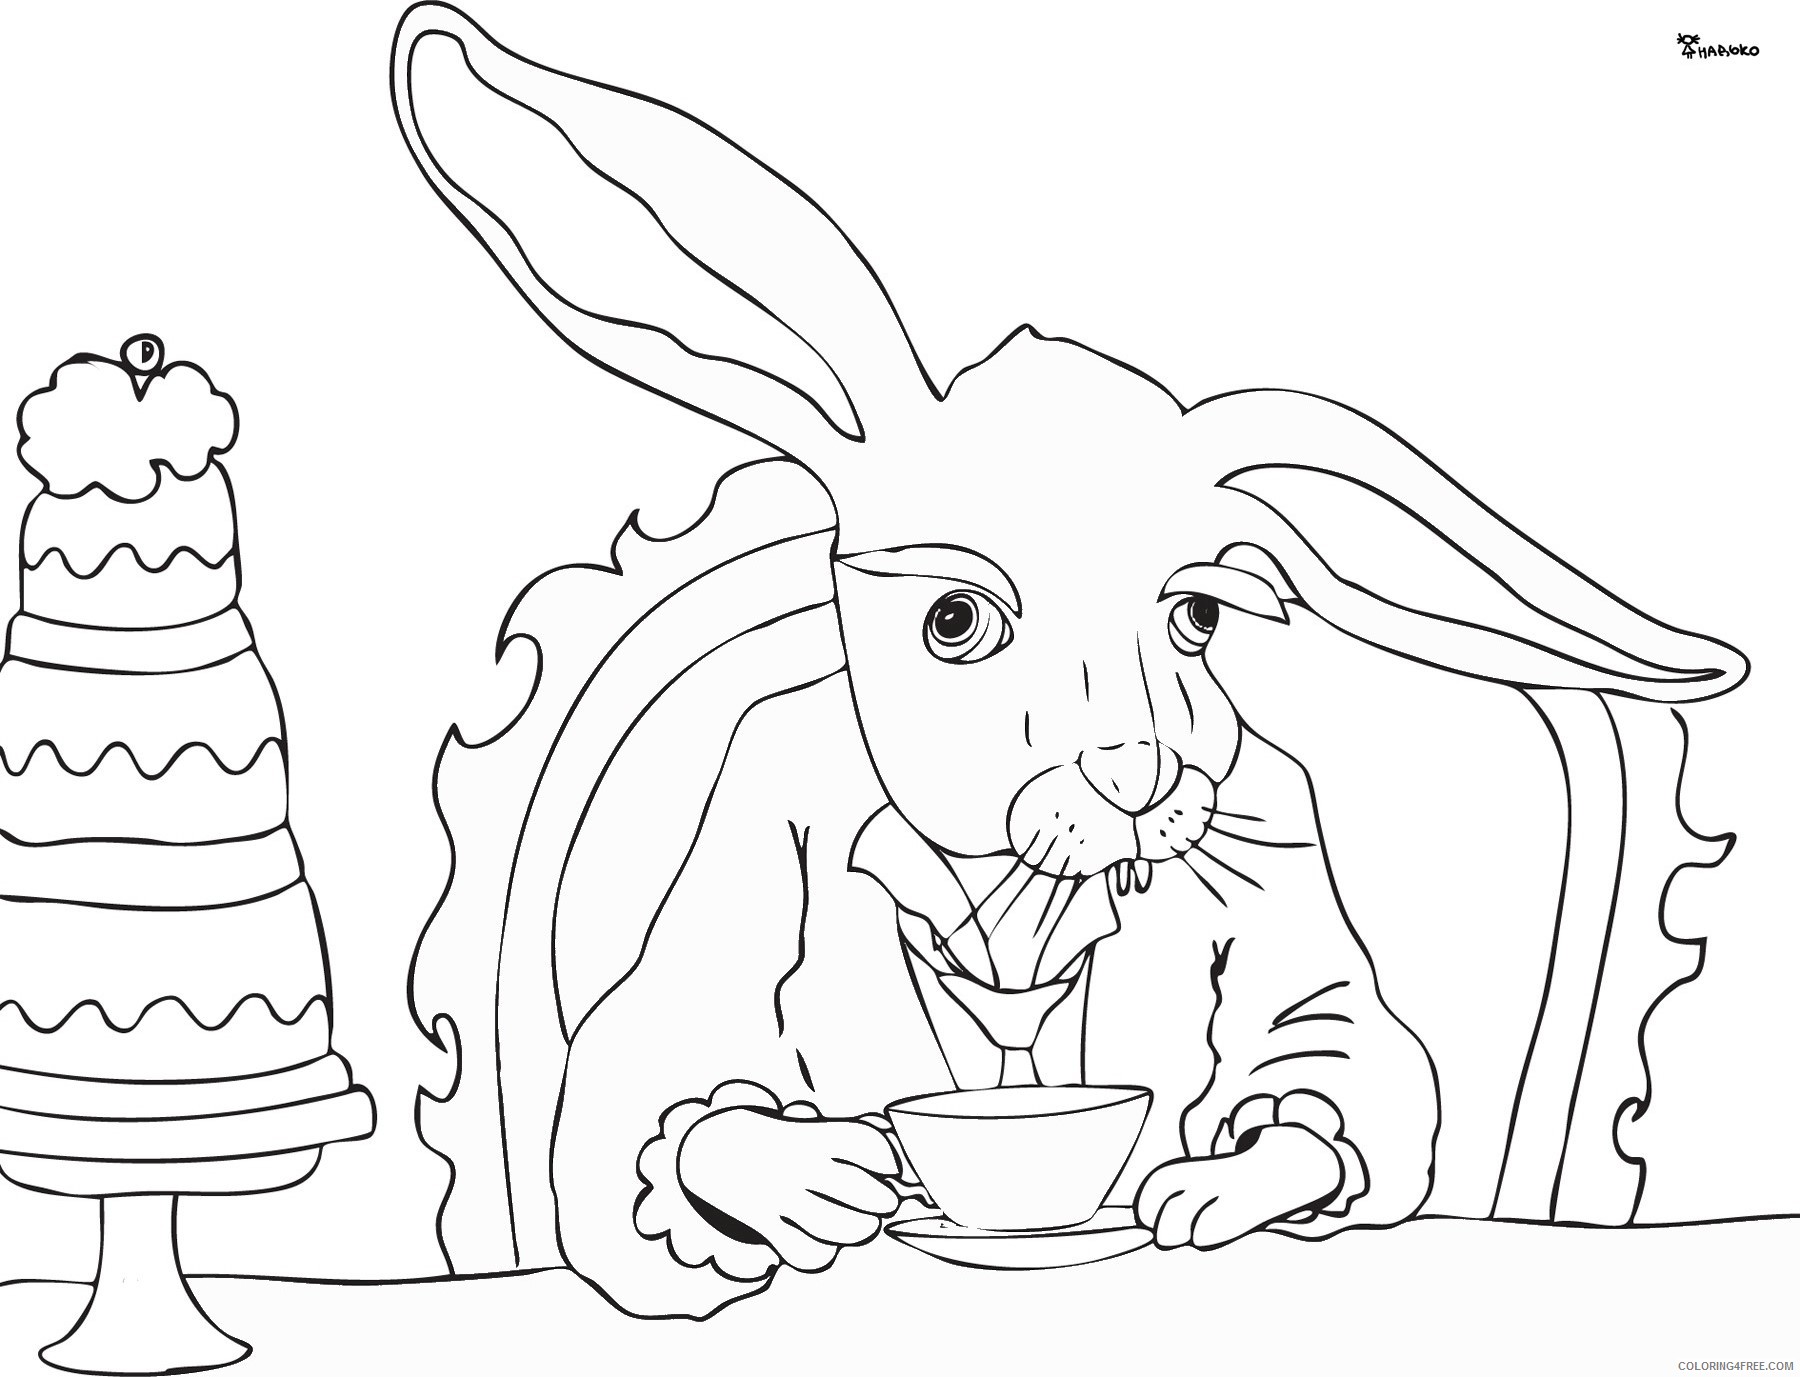 Alice in Wonderland Coloring Pages Cartoons alice_80 Printable 2020 0371 Coloring4free